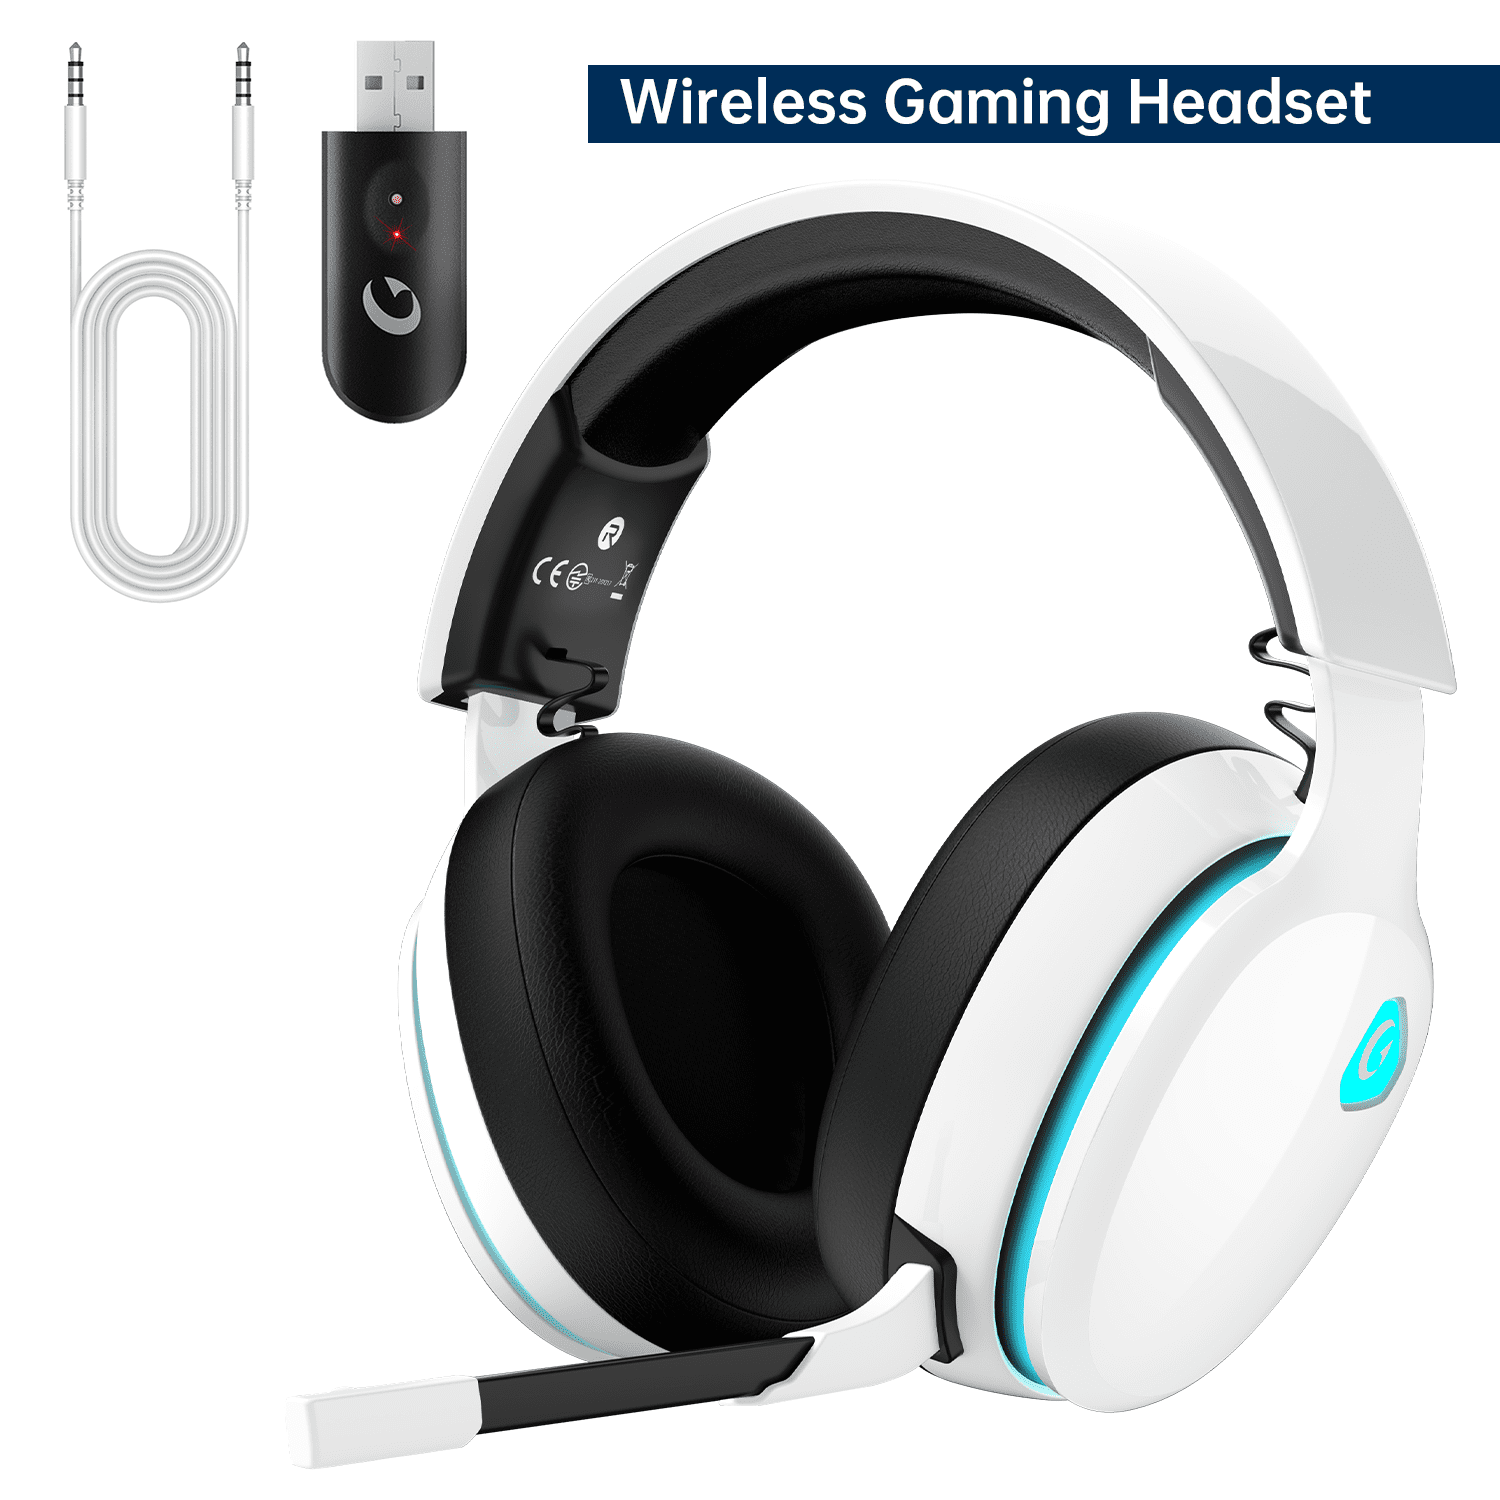 (Refurbished: Headset With Cream Sound 7.1 PRO PS4 New) CORSAIR Cleaning Surround Like PC, HS70 Gaming and Wireless kit Axtion - PS5, - Pre-Owned for Bundle Bolt